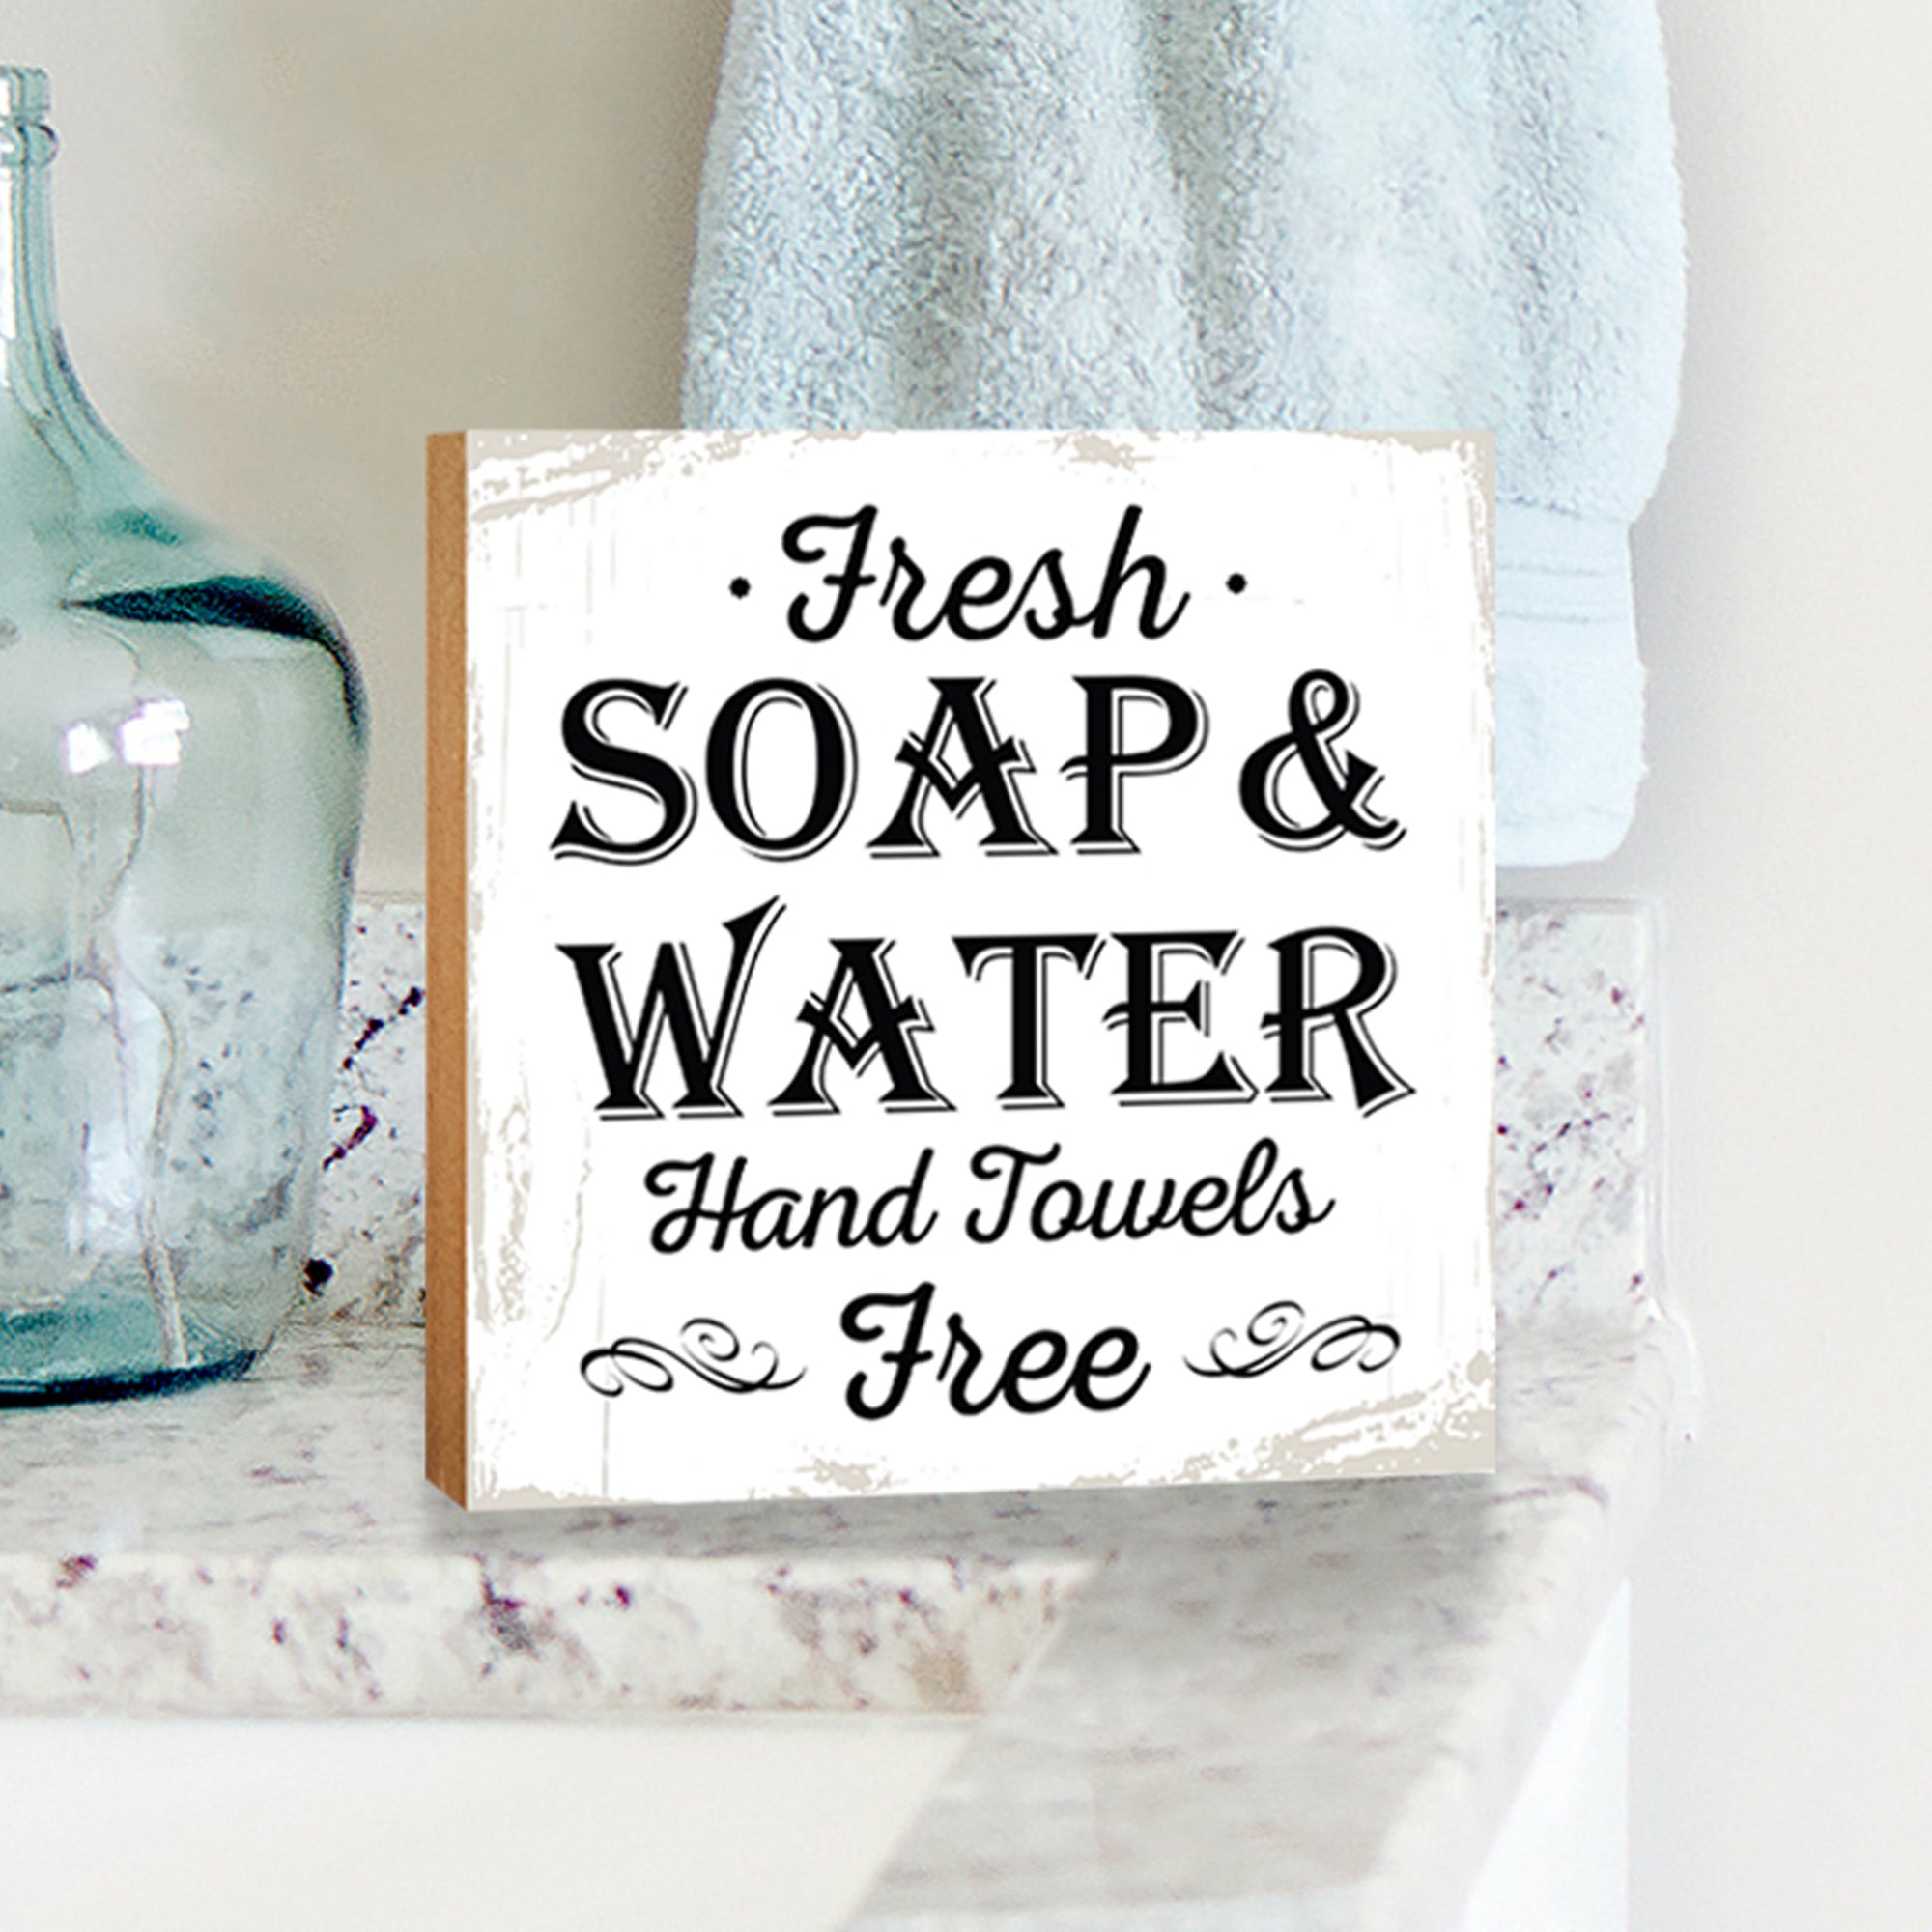 Wooden BATHROOM 6x6 Block shelf decor (Fresh Soap & Water Free) Inspirational Plaque Tabletop and Family Home Decoration